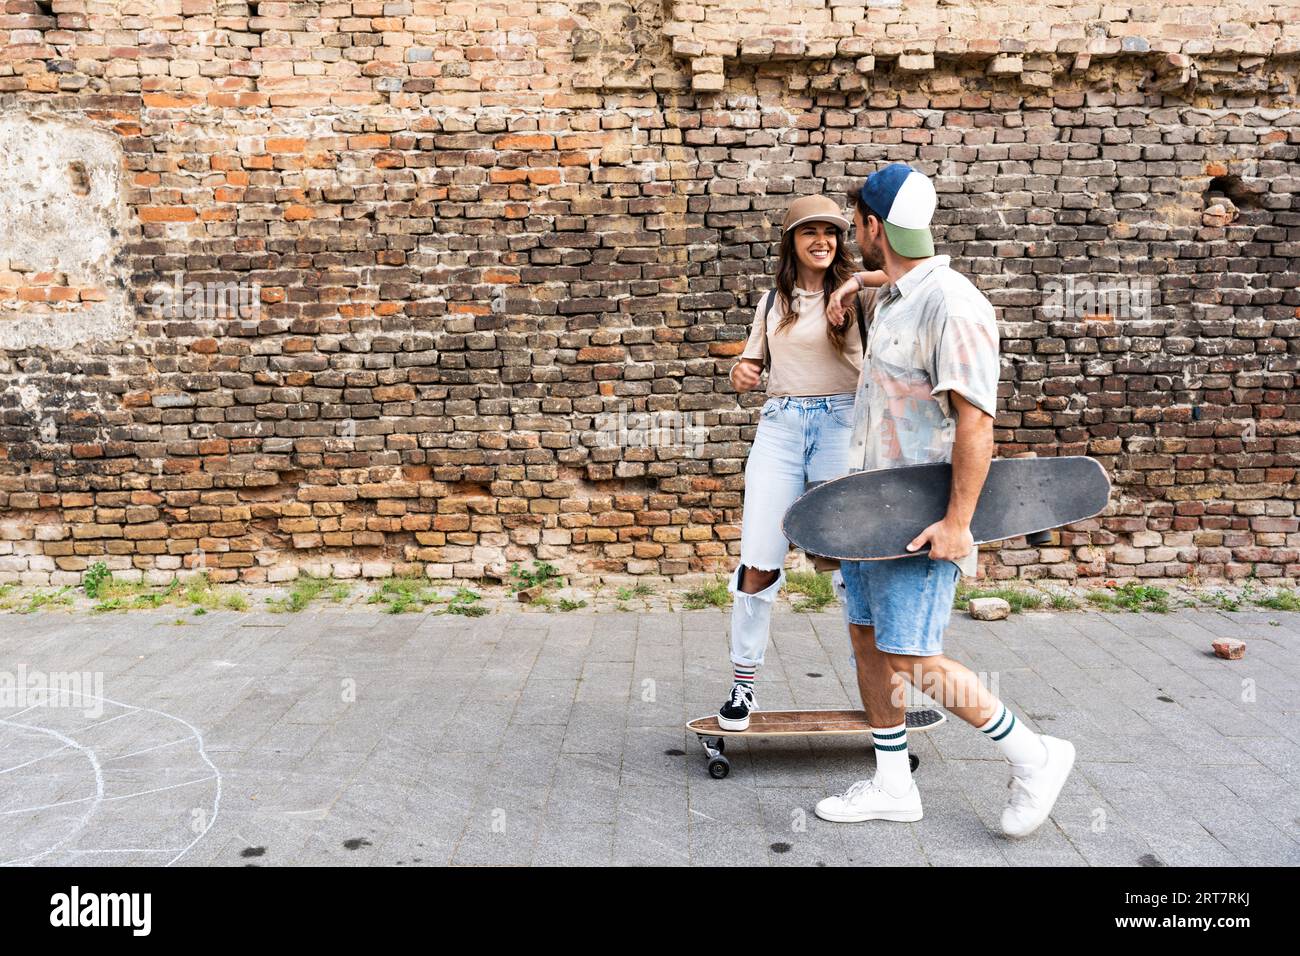 Adult Hipster Couple With Longboard And Roller Skate Sitting In Park  High-Res Stock Photo - Getty Images